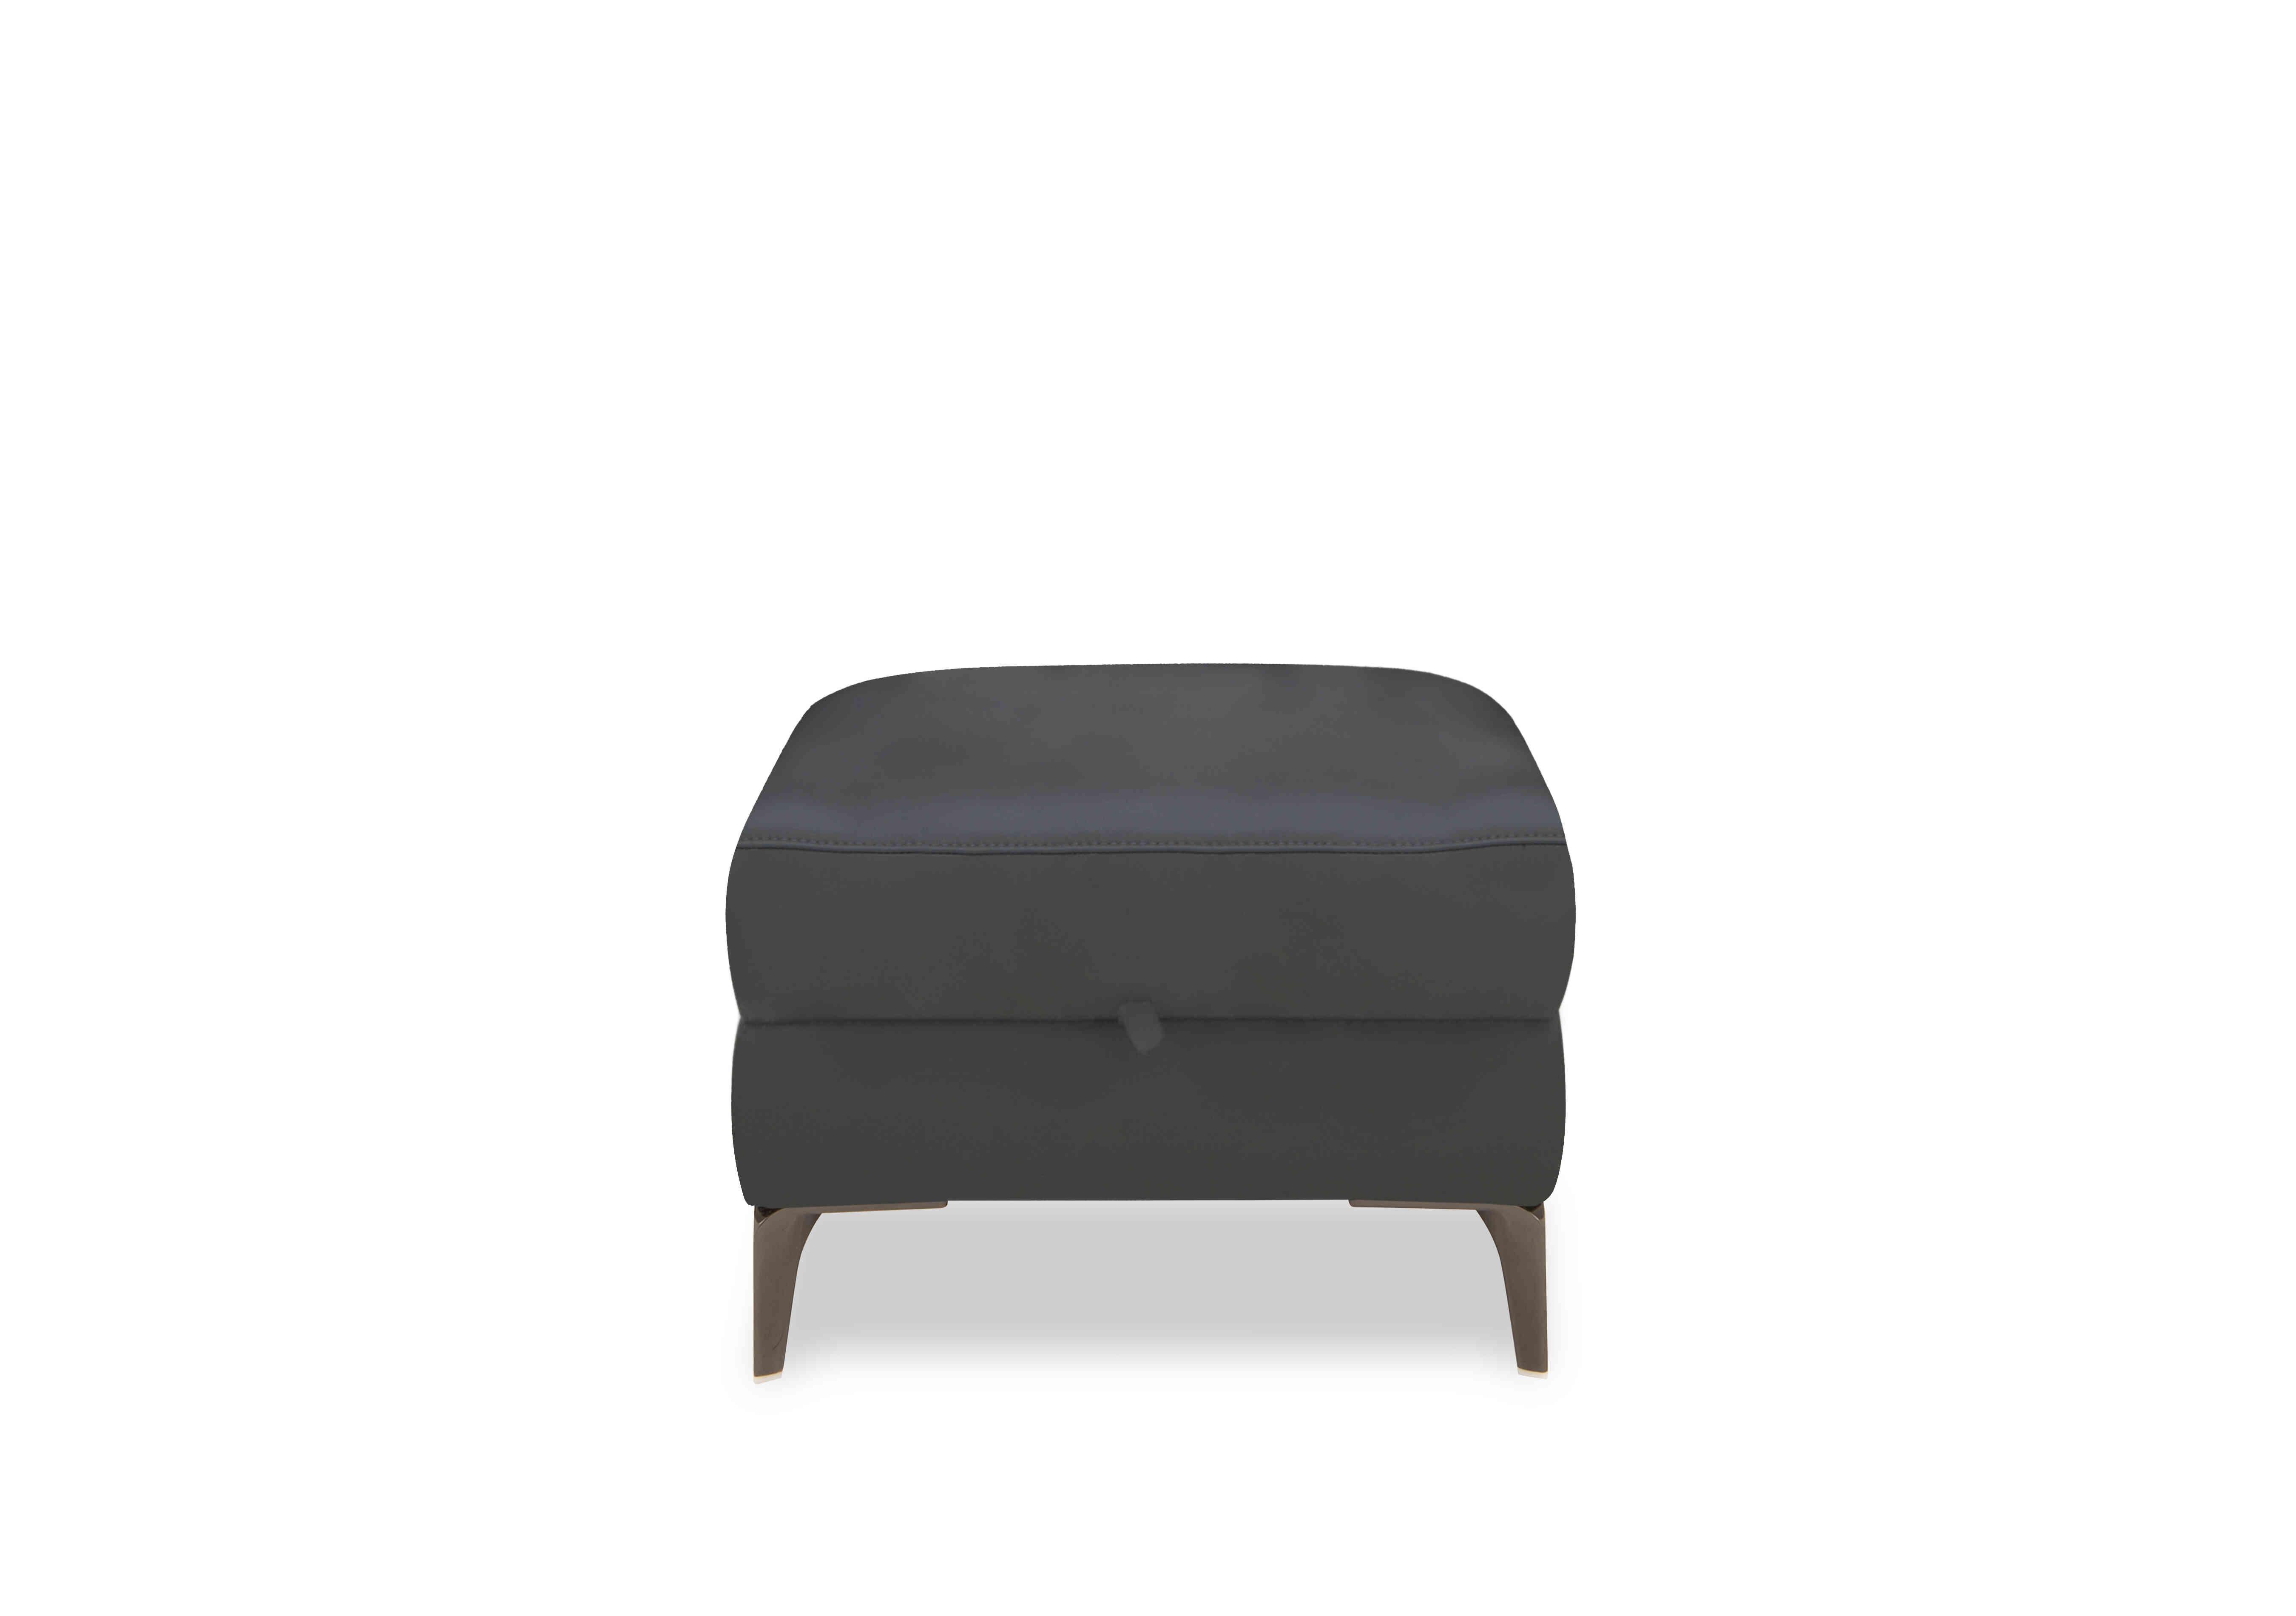 New York Leather Storage Footstool in Nw-517e Shale Grey on Furniture Village